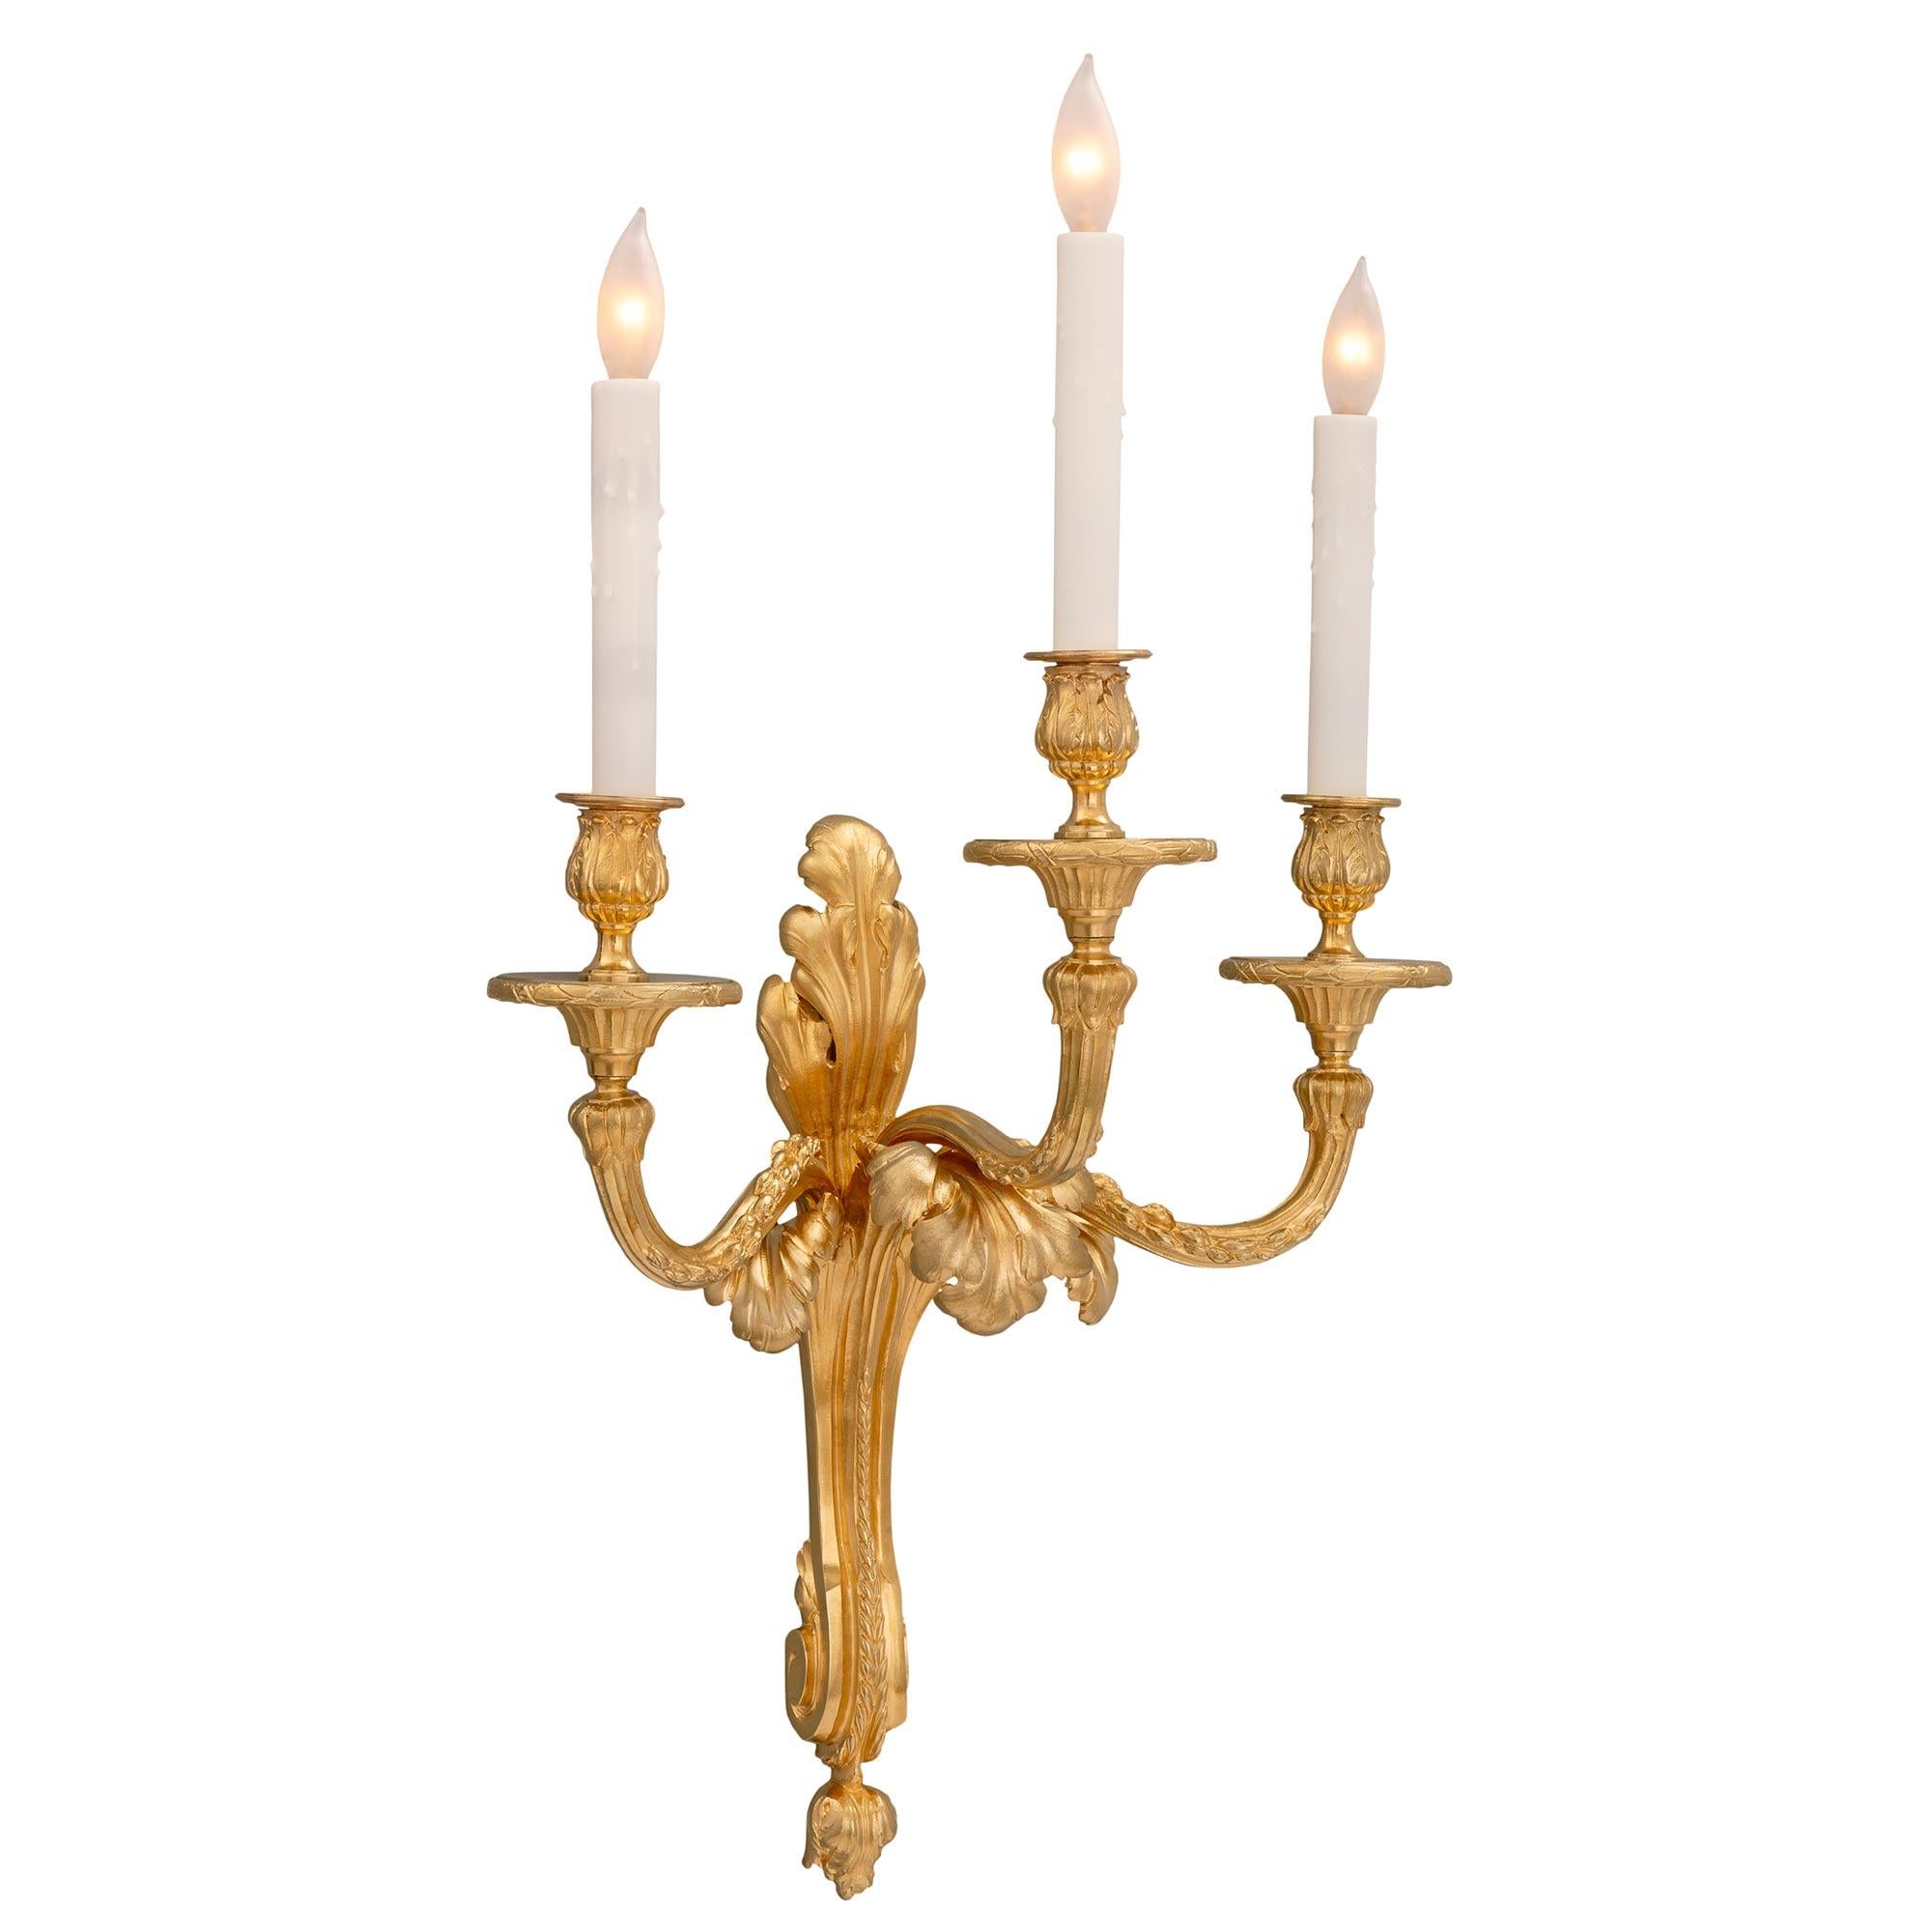 A most elegant and complete set of four French 19th century Louis XVI st. ormolu sconces. Each three arm sconce is centered by a lovely bottom foliate finial below the beautiful scrolled central support with a large richly chased acanthus leaf at